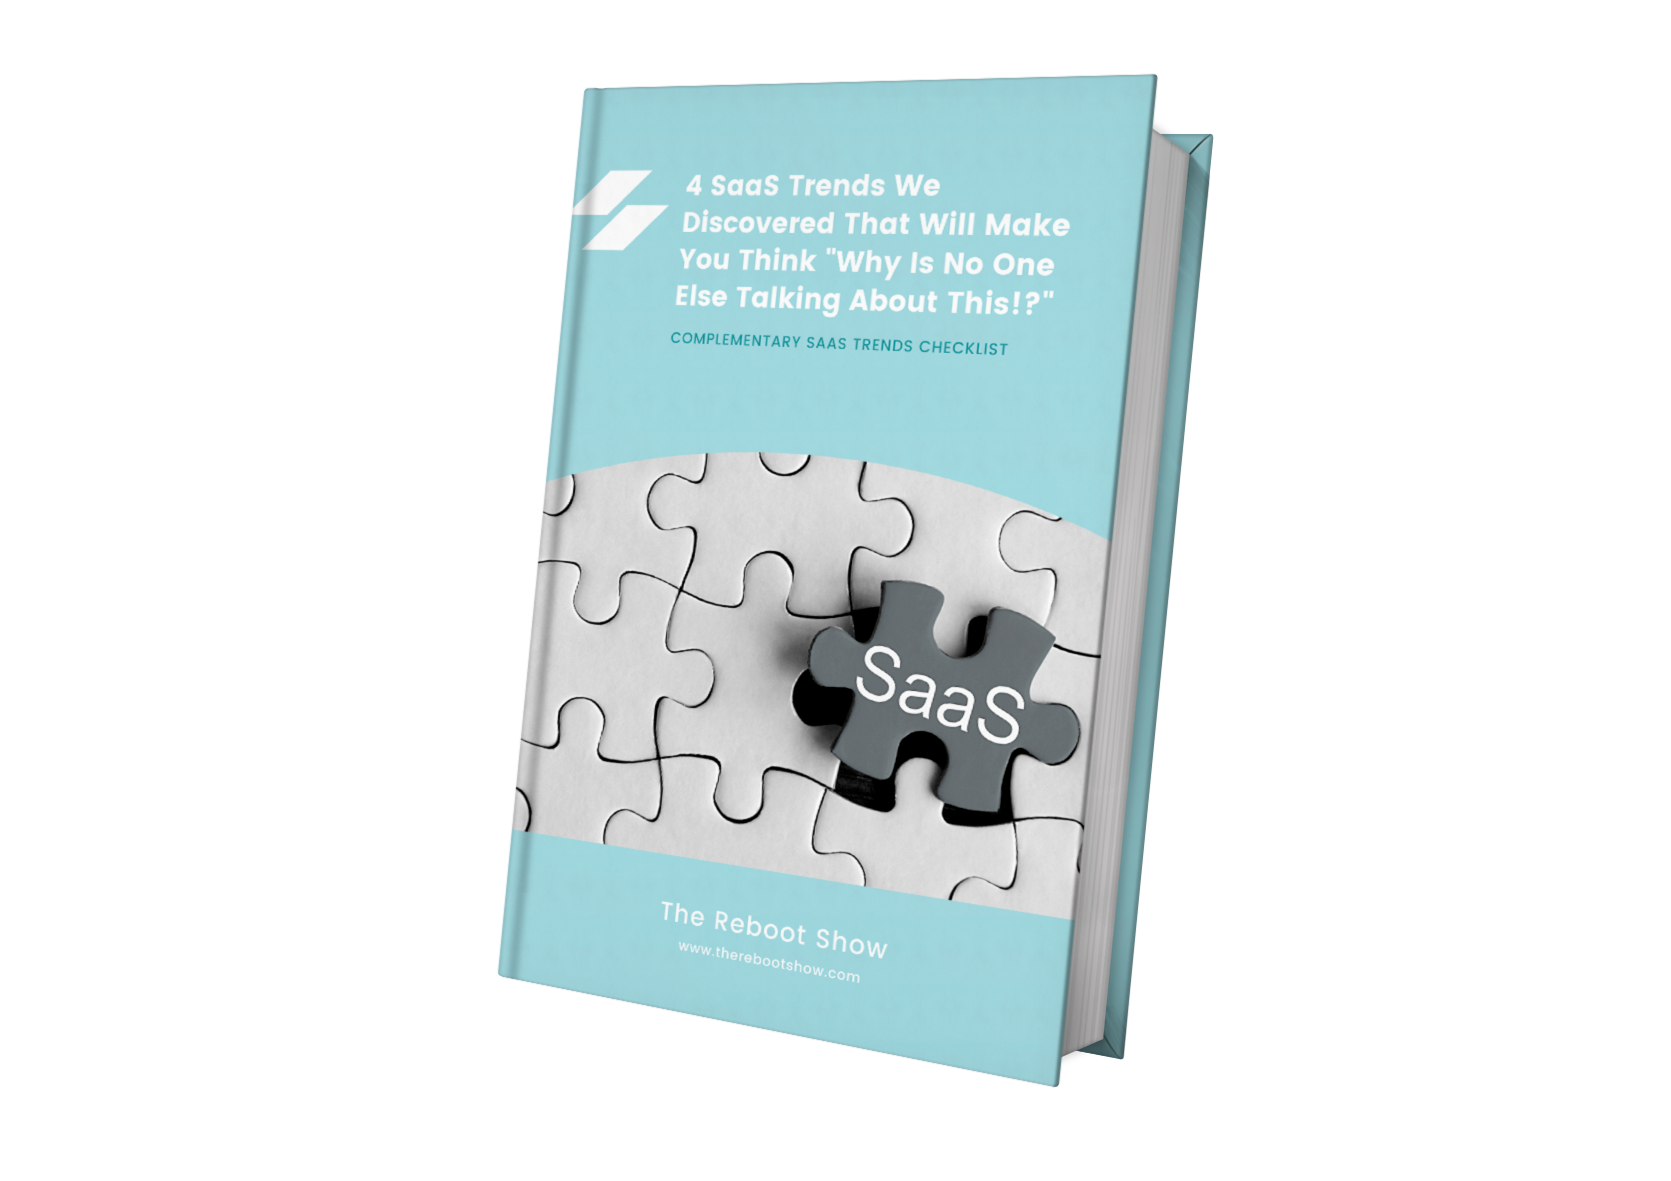 Saas trends book mockup smaller size